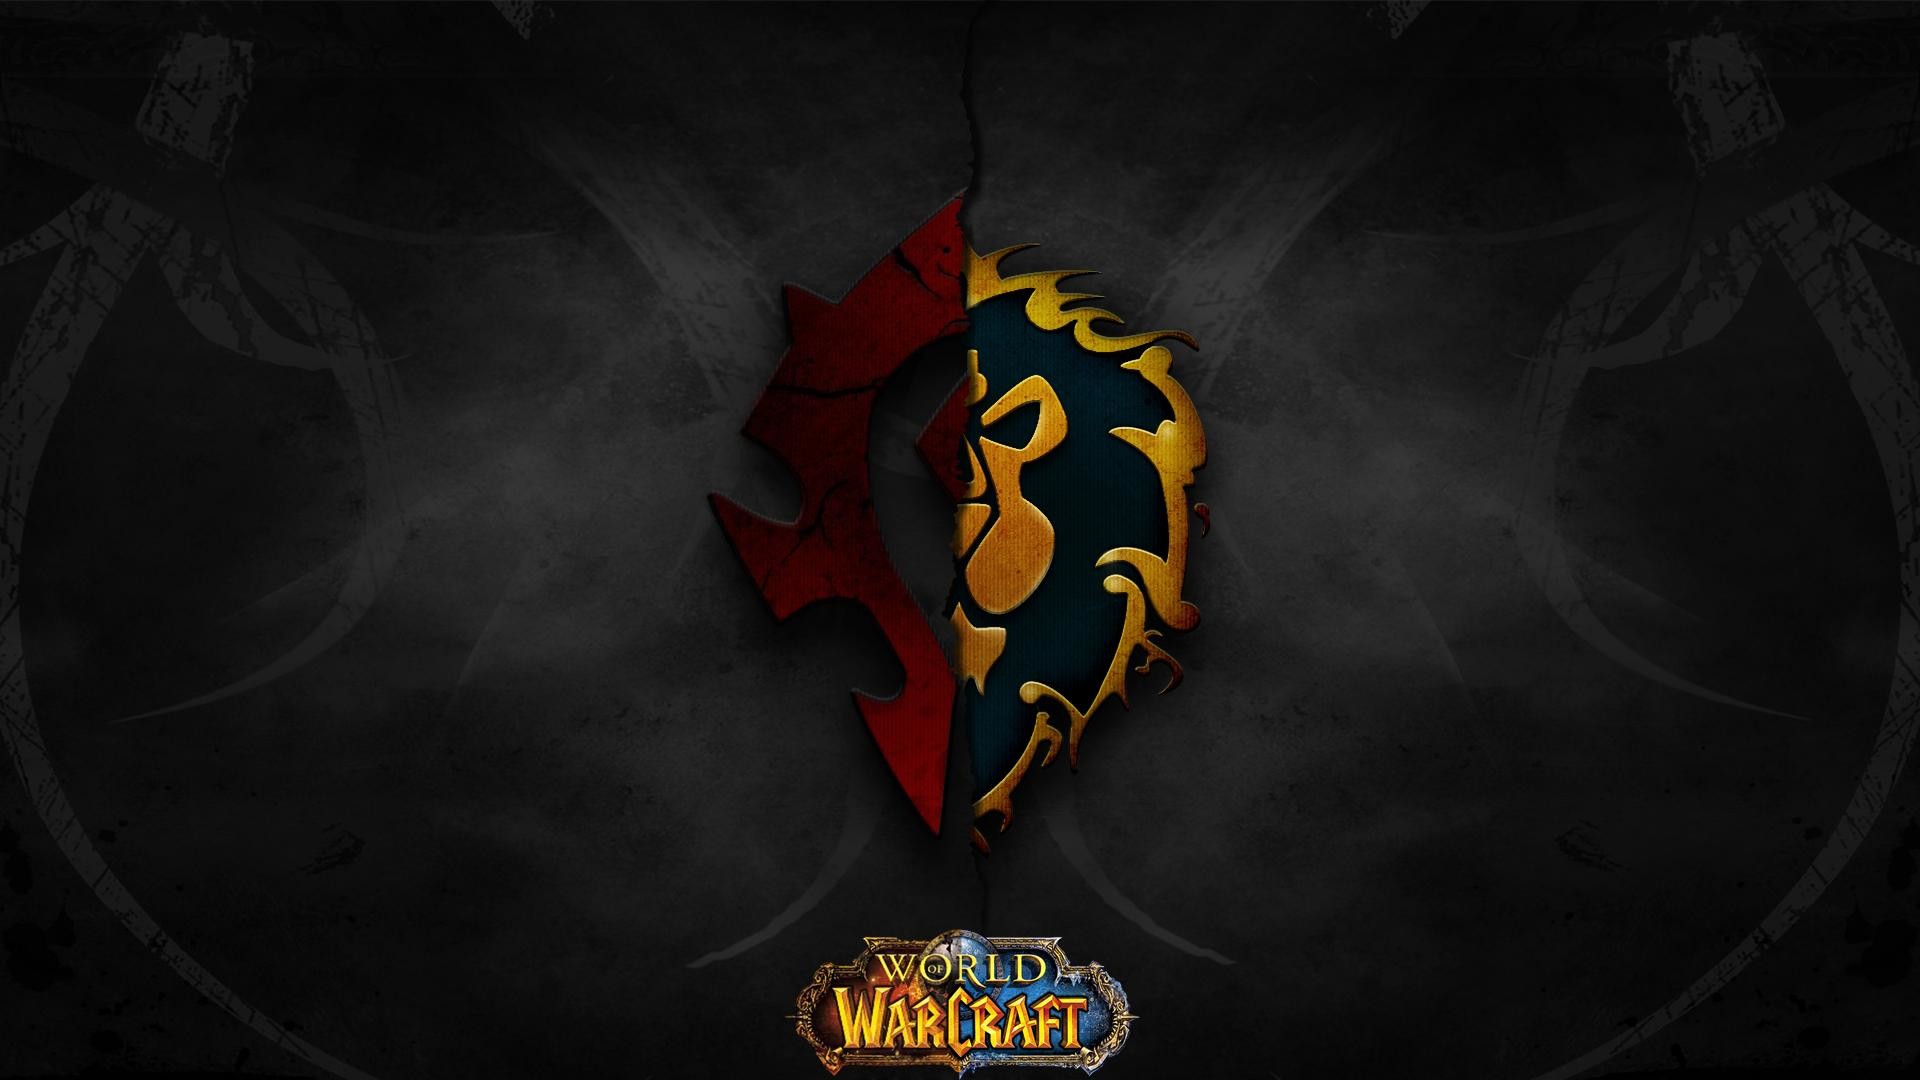 1920x1080 World of Warcraft FOR THE HORDE!